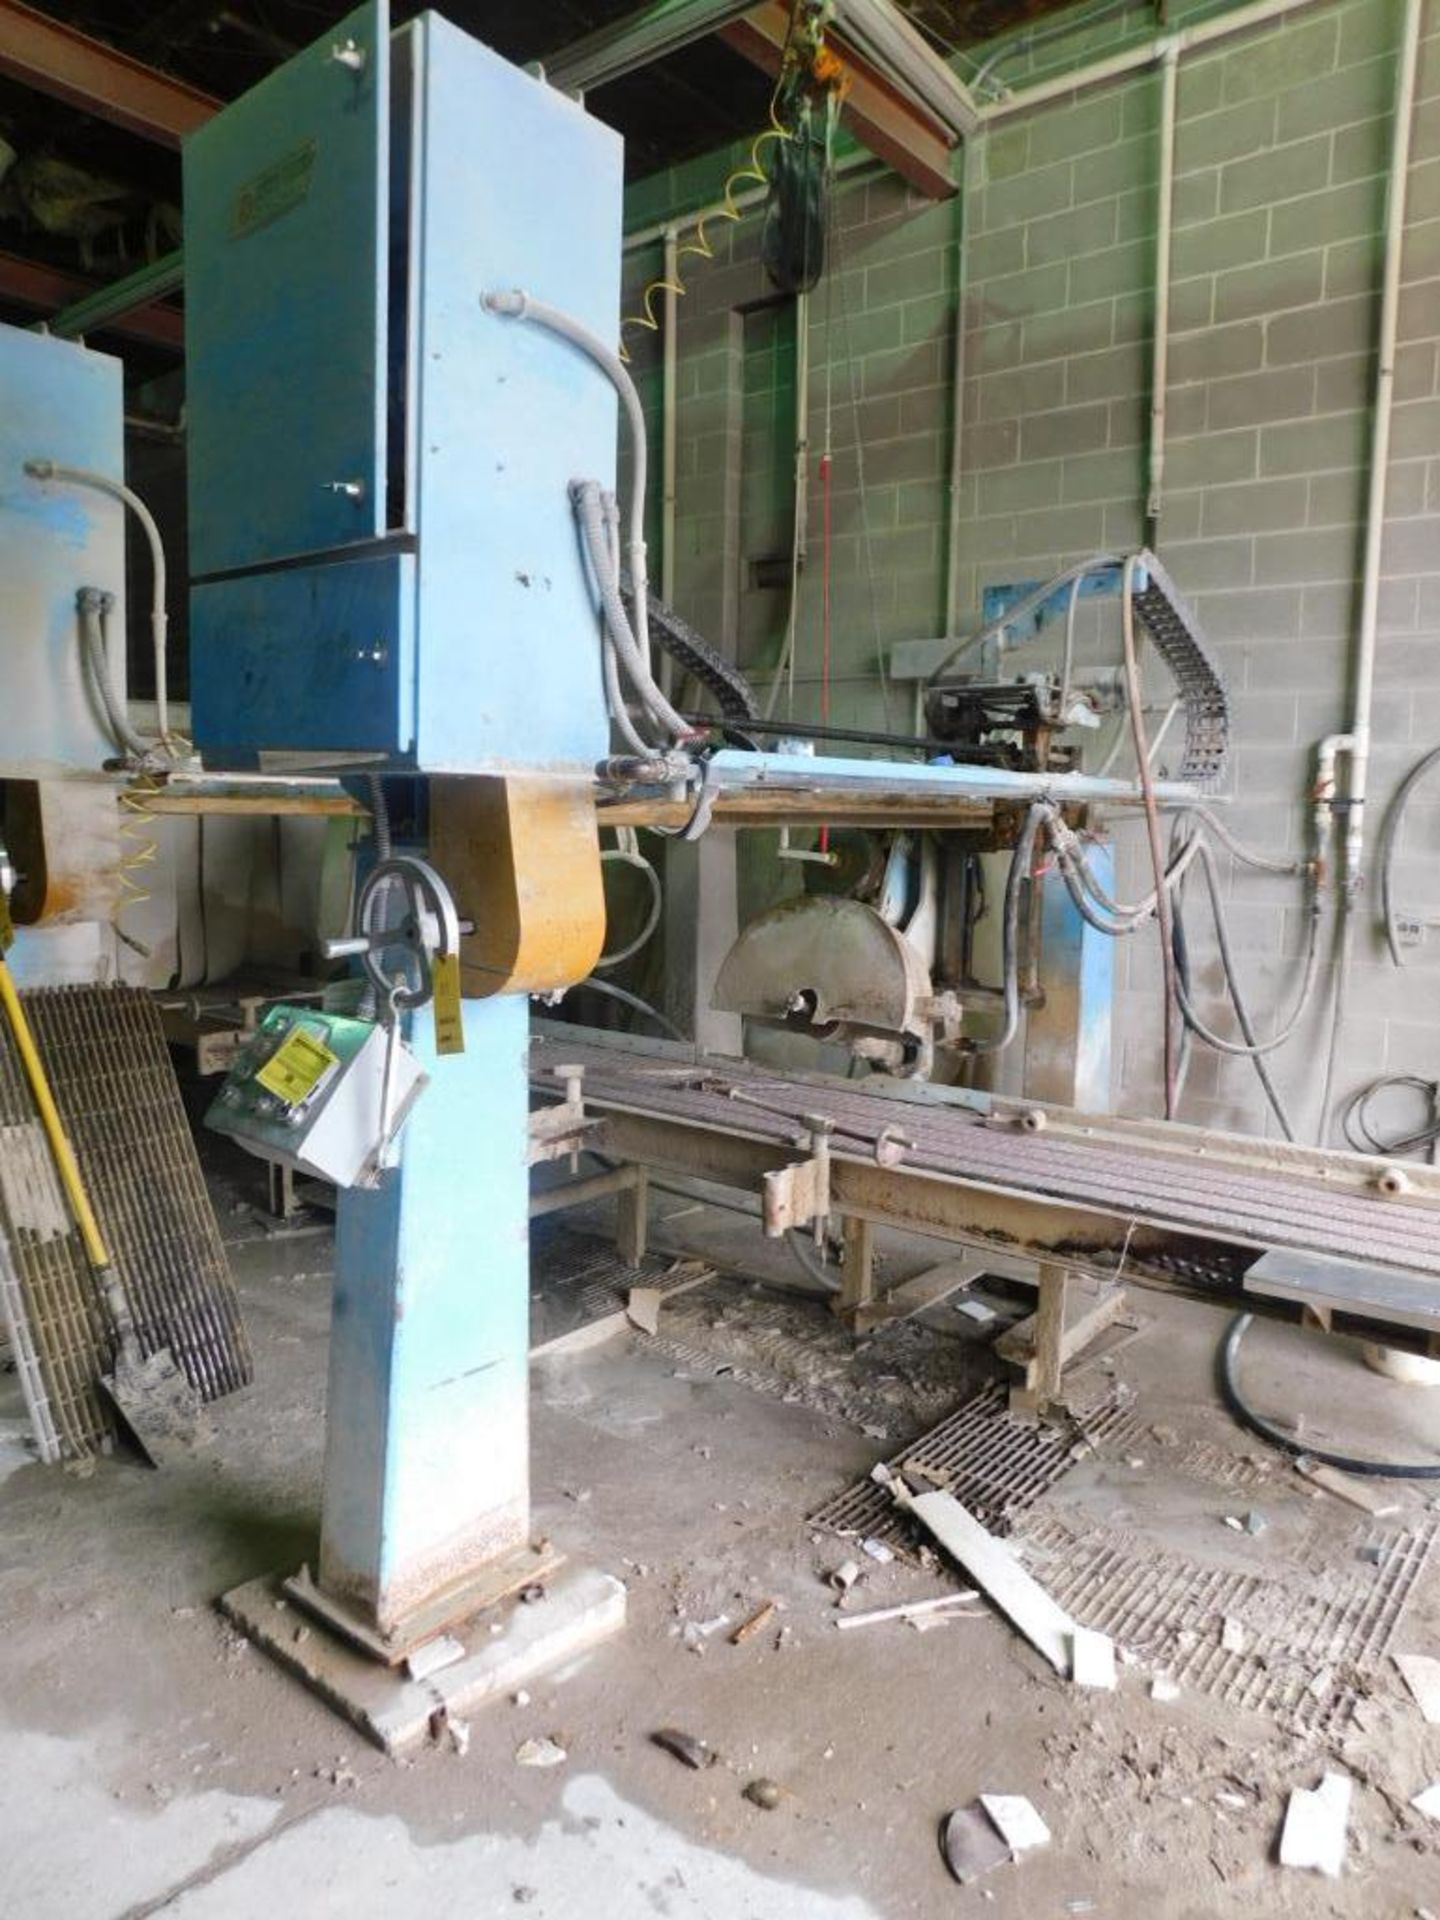 Sawing Systems Stone Saw Model 541B, S/N 021566